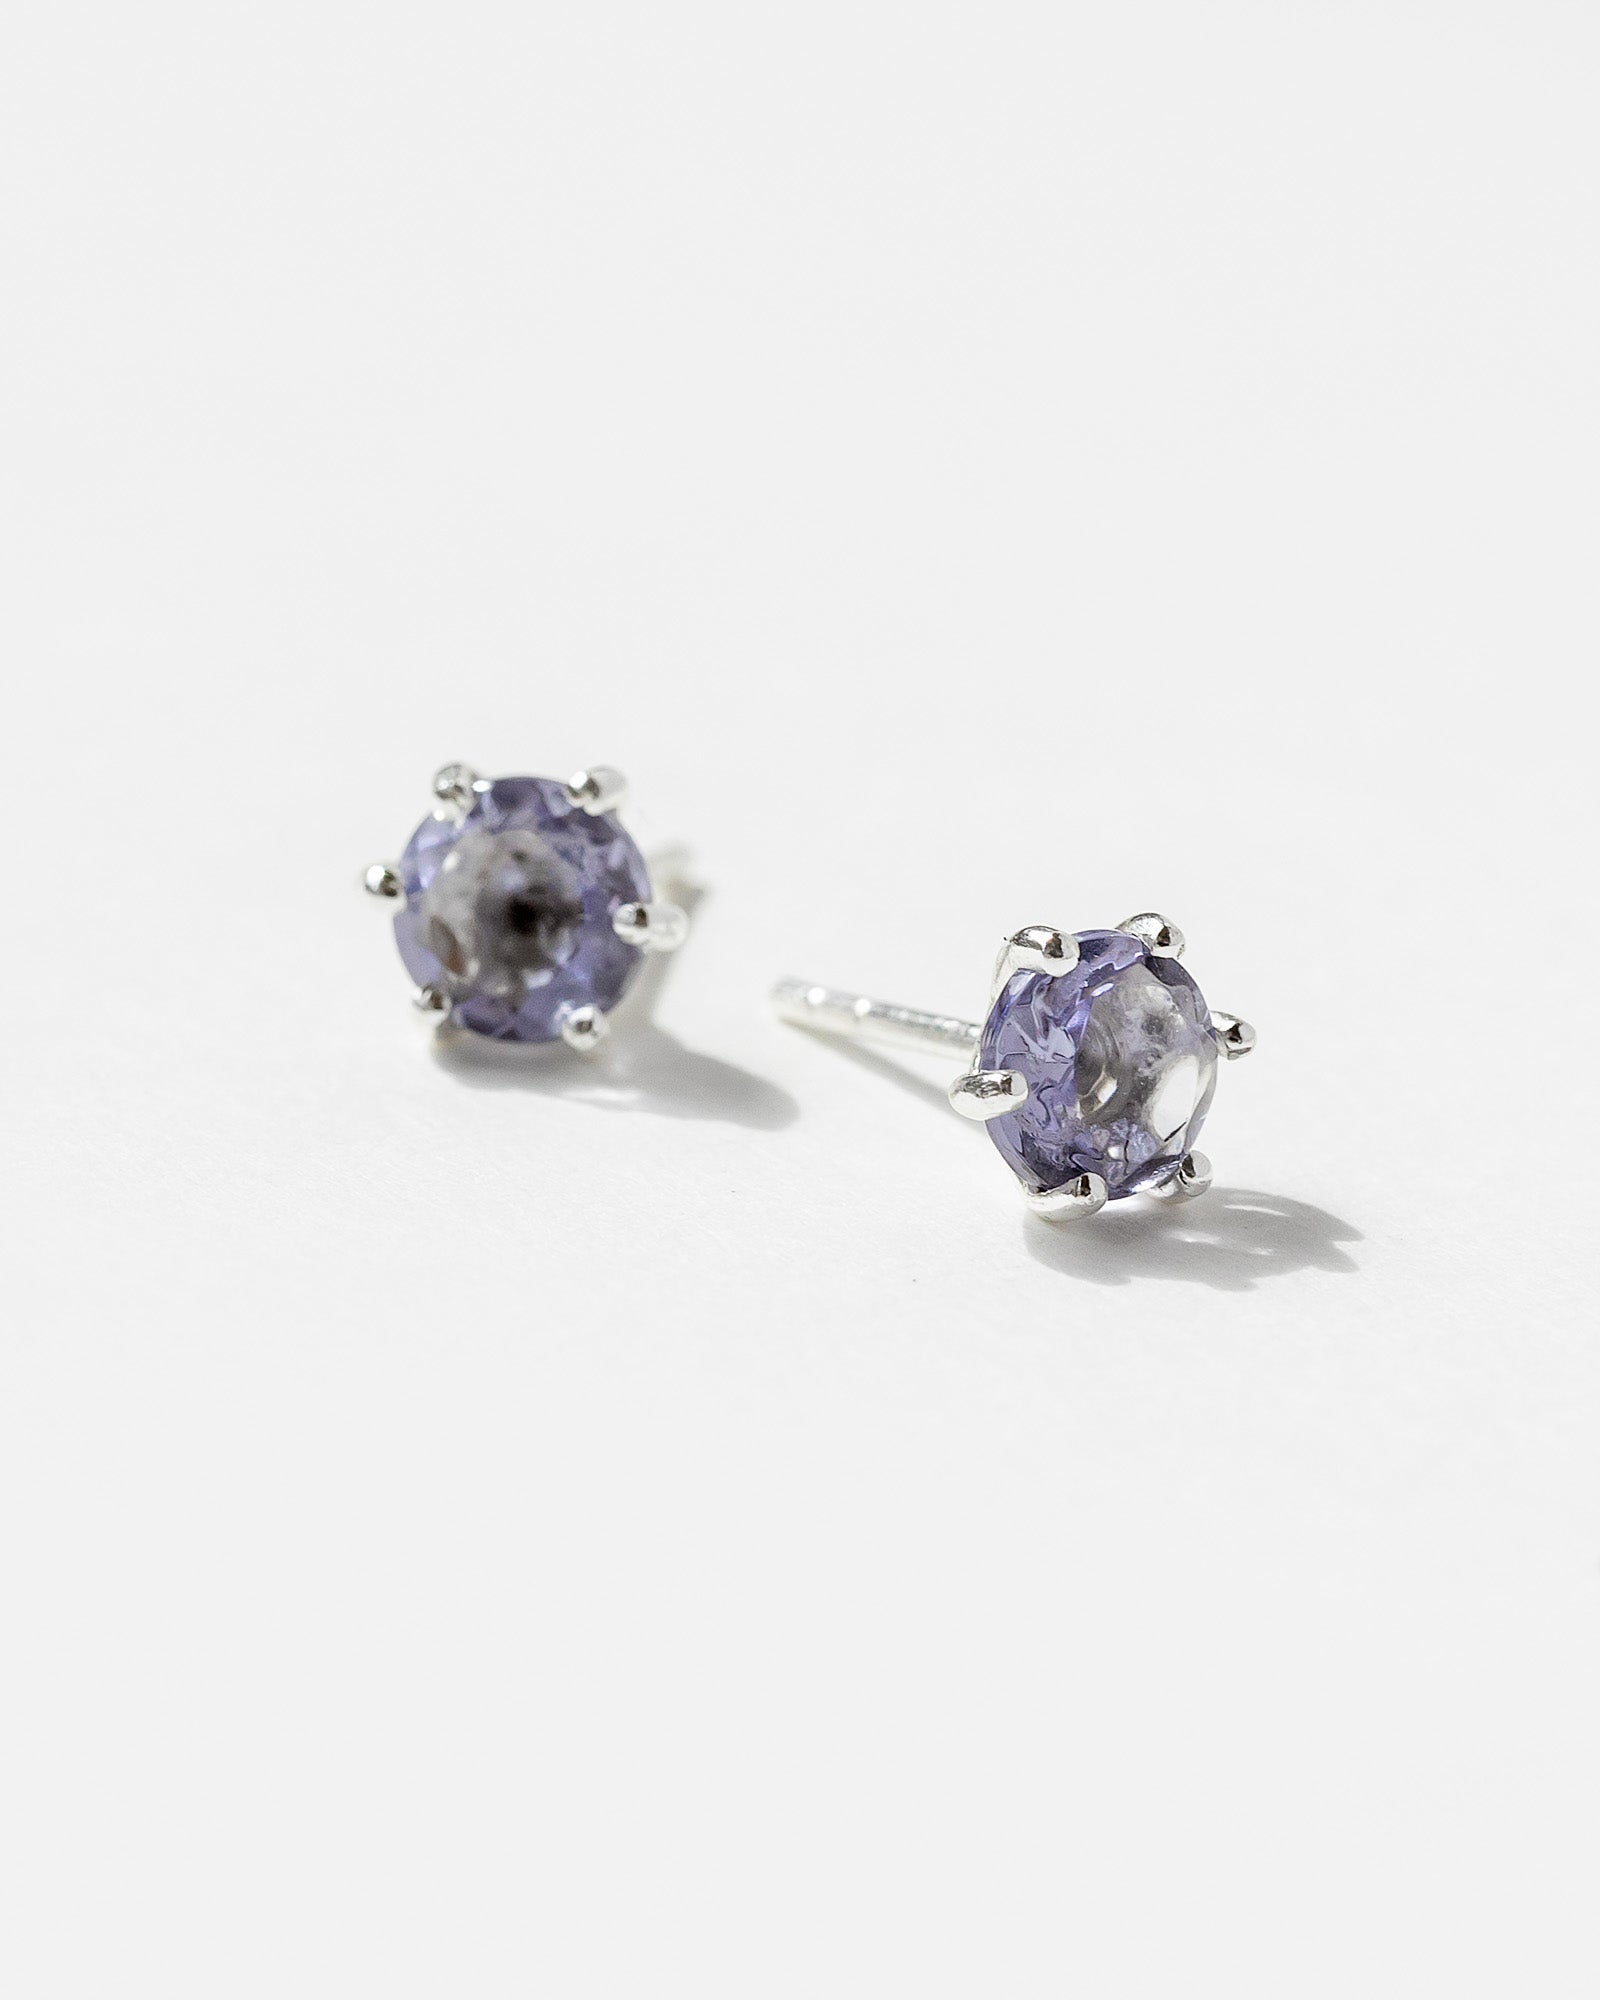 Periwinkle Studs - Trades of Hope 